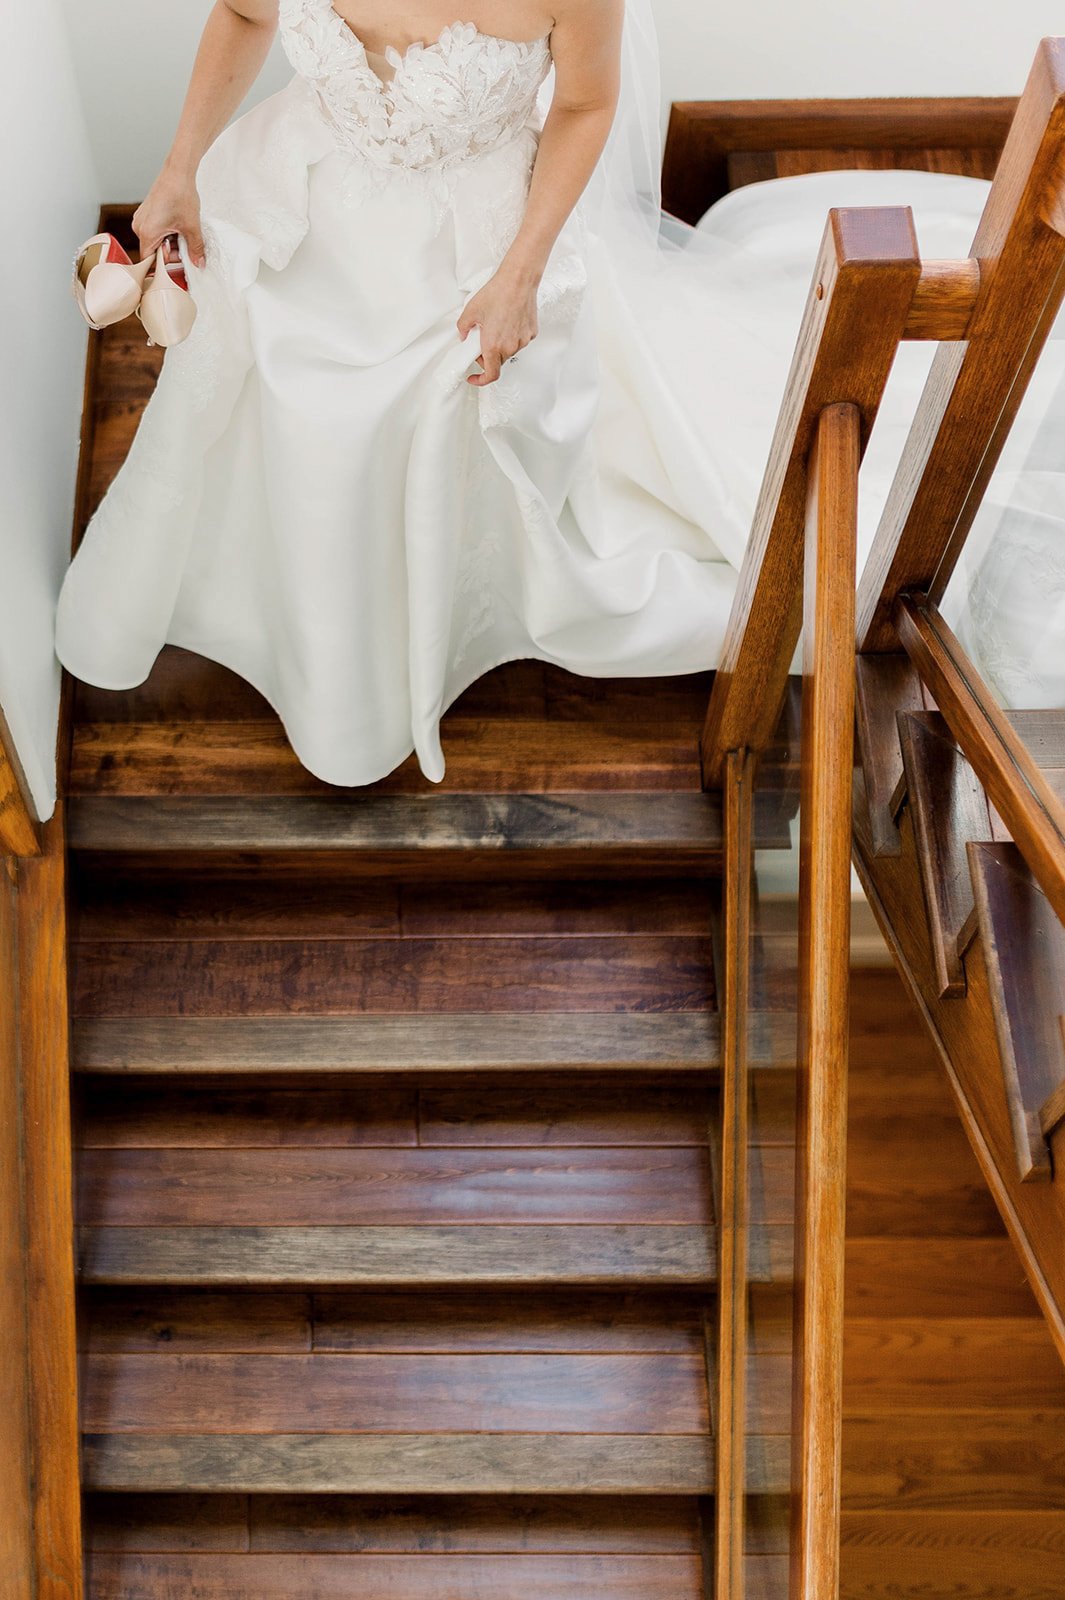 Bride descends staircase, holding up her wedding dress to reduce tripping hazards, as she makes her way to hart house wedding. Photographed by beautiful life studios